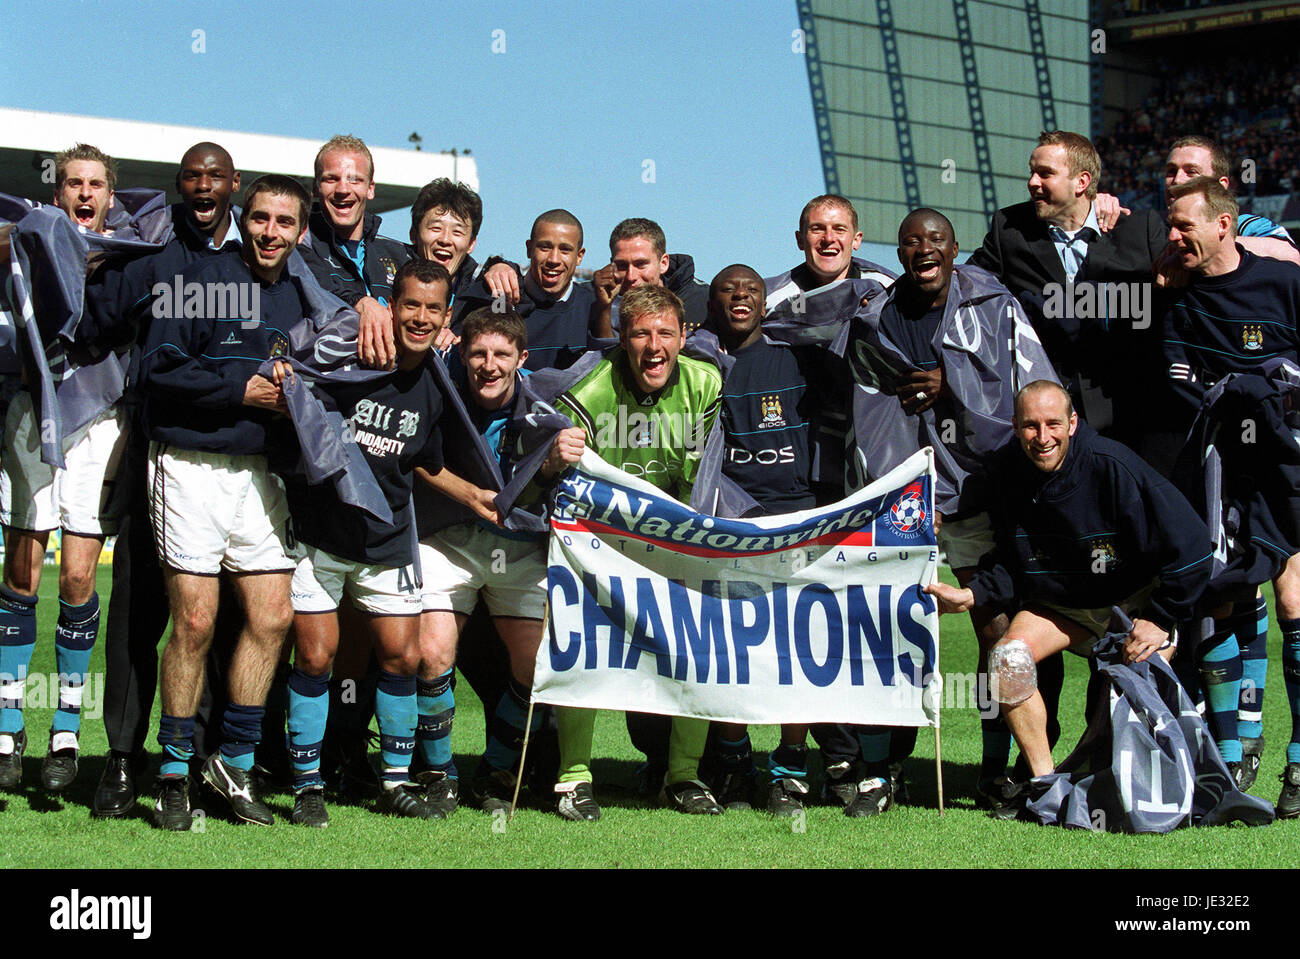 MANCHESTER CITY FC DIVISION 1 CHAMPIONS MAINE ROAD MANCHESTER ENGLAND 06 April 2002 Stock Photo